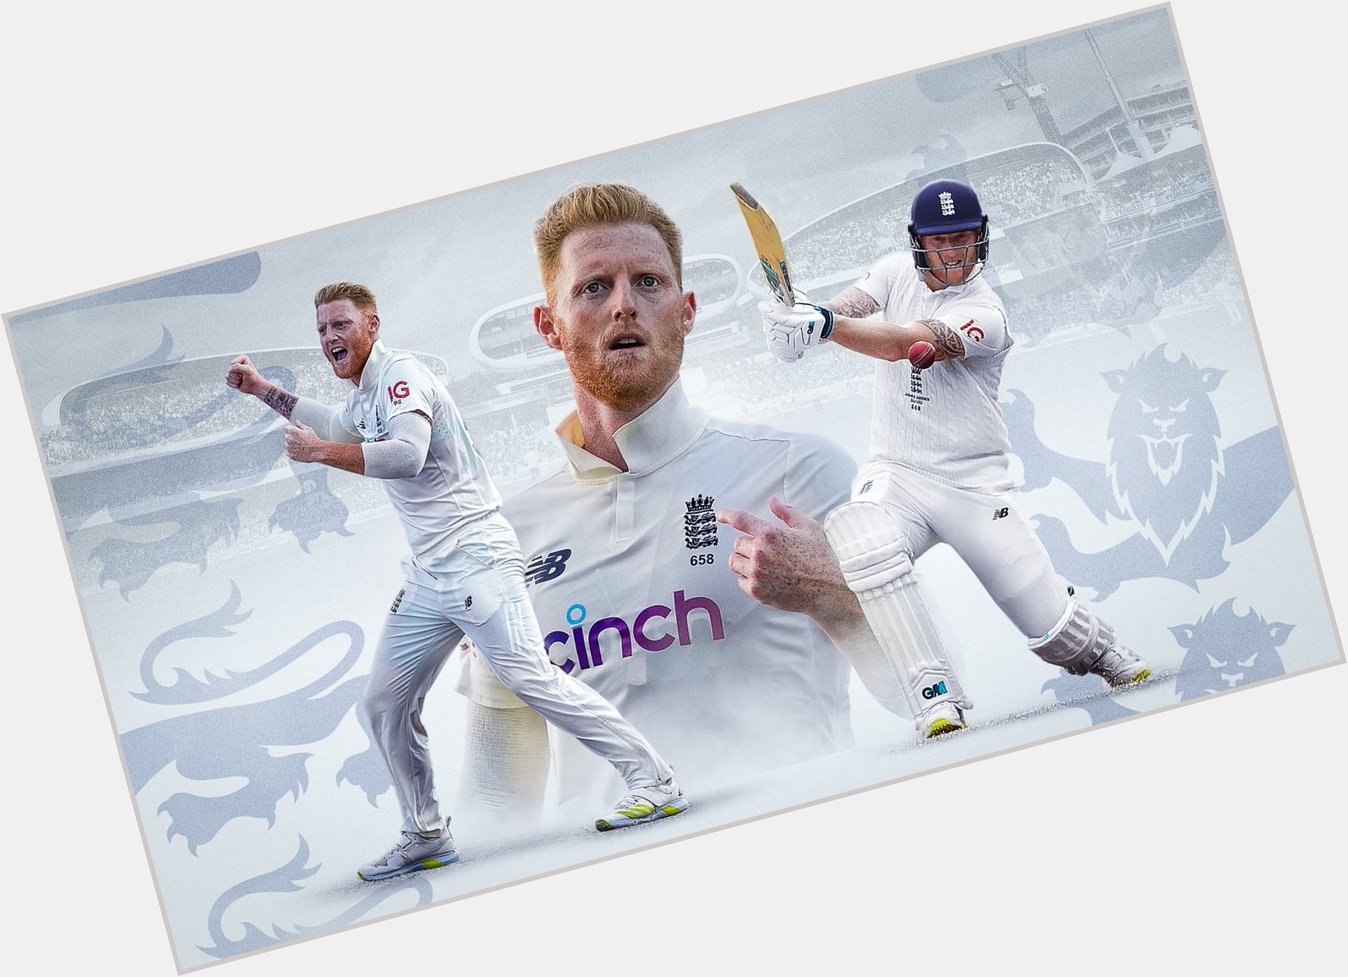 HAPPY BIRTHDAY TO YOU WORLD\S BEST ALLROUNDER
BEN STOKES. THE NEWLY APPOINTED TEST CAPTAIN OF ENGLAND. 